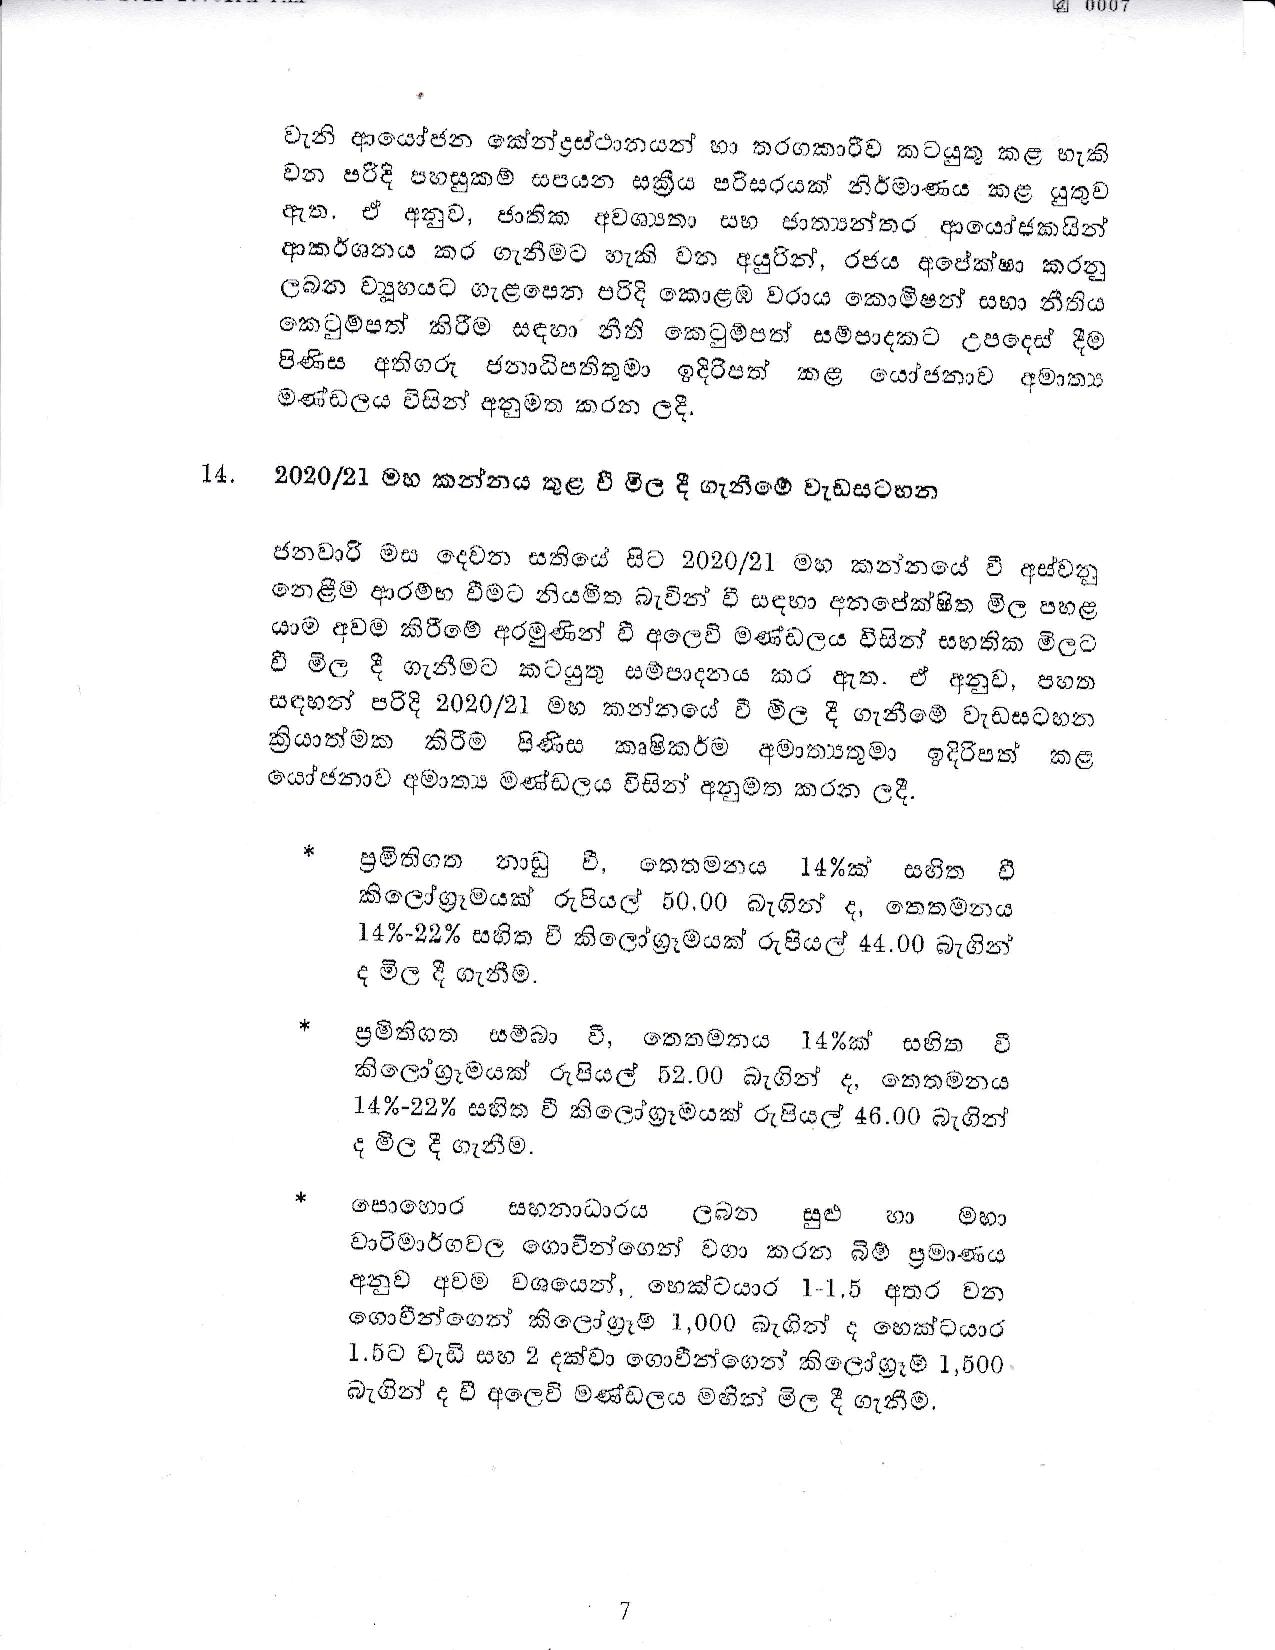 Cabinet Decision on 04.01.2021 page 007